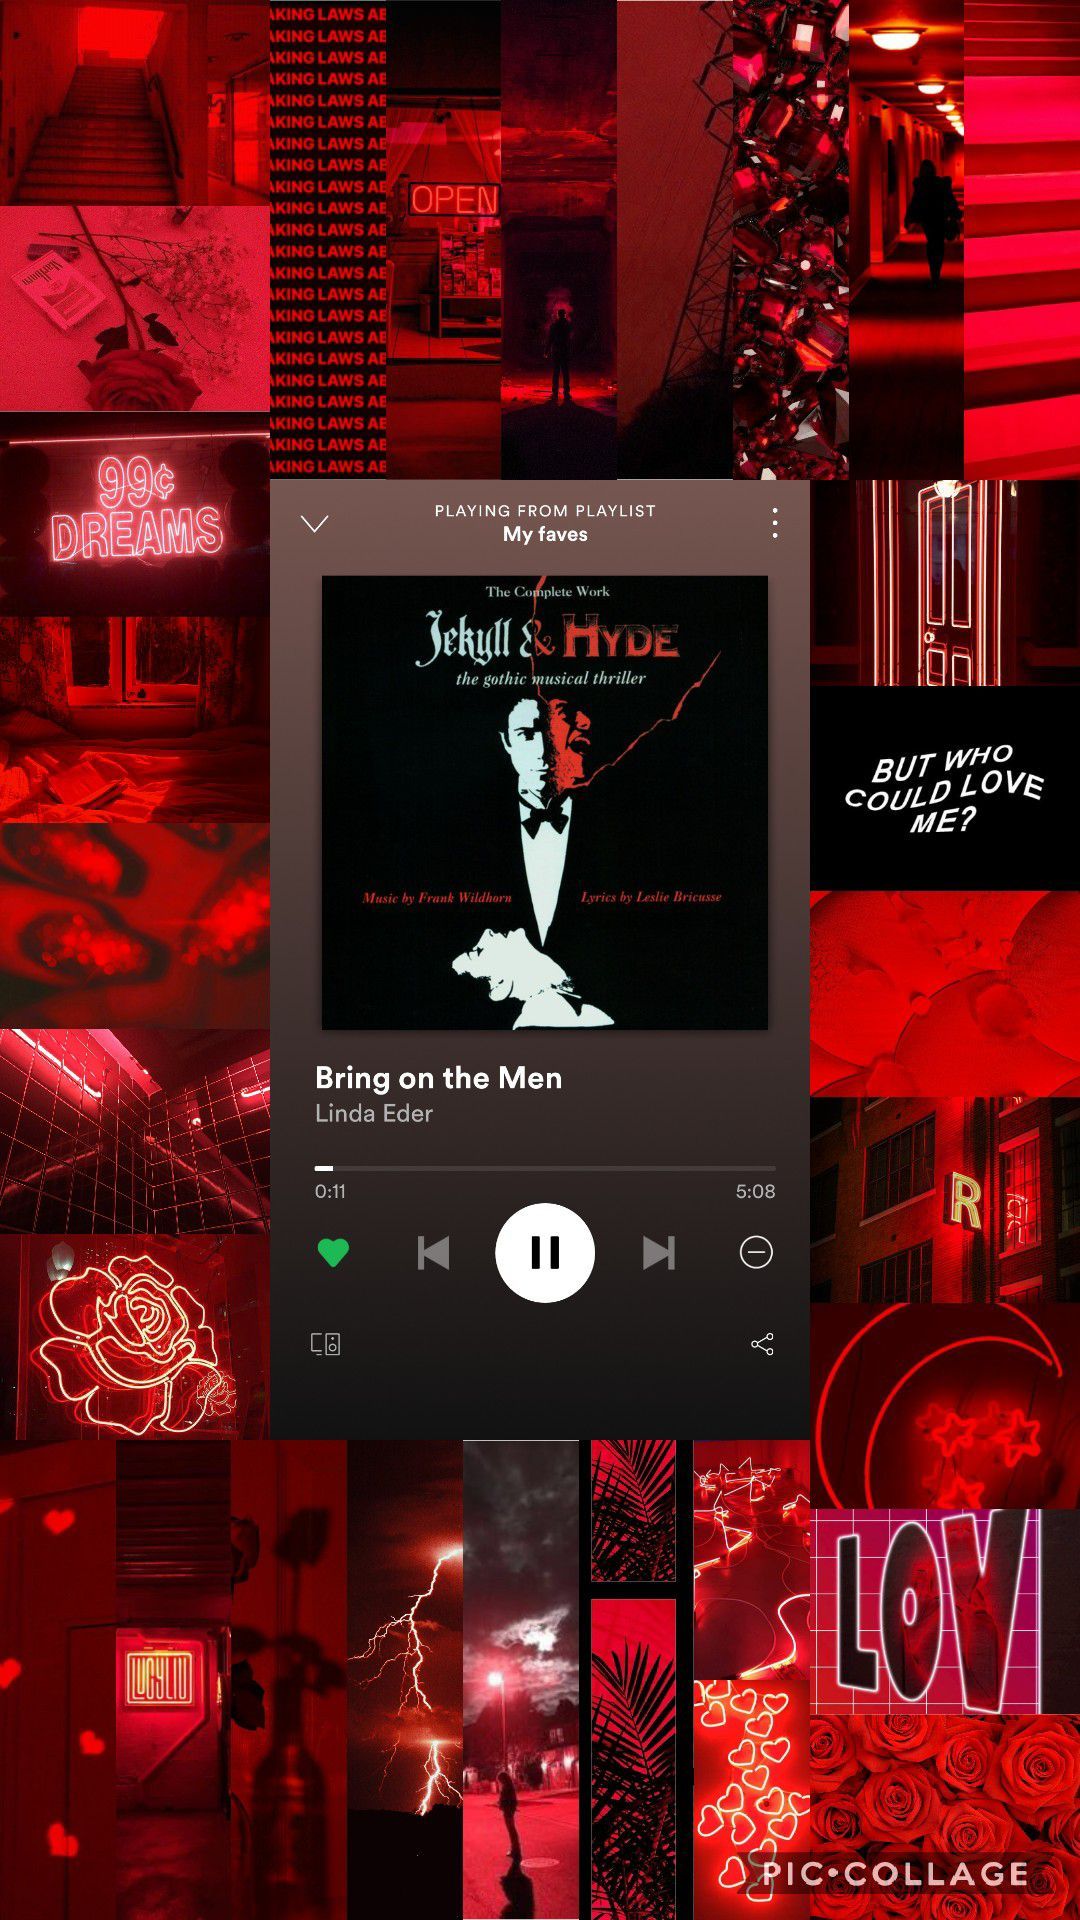 Aesthetic red music player background with 90s dreams, but who could love, and bring on the men - Broadway